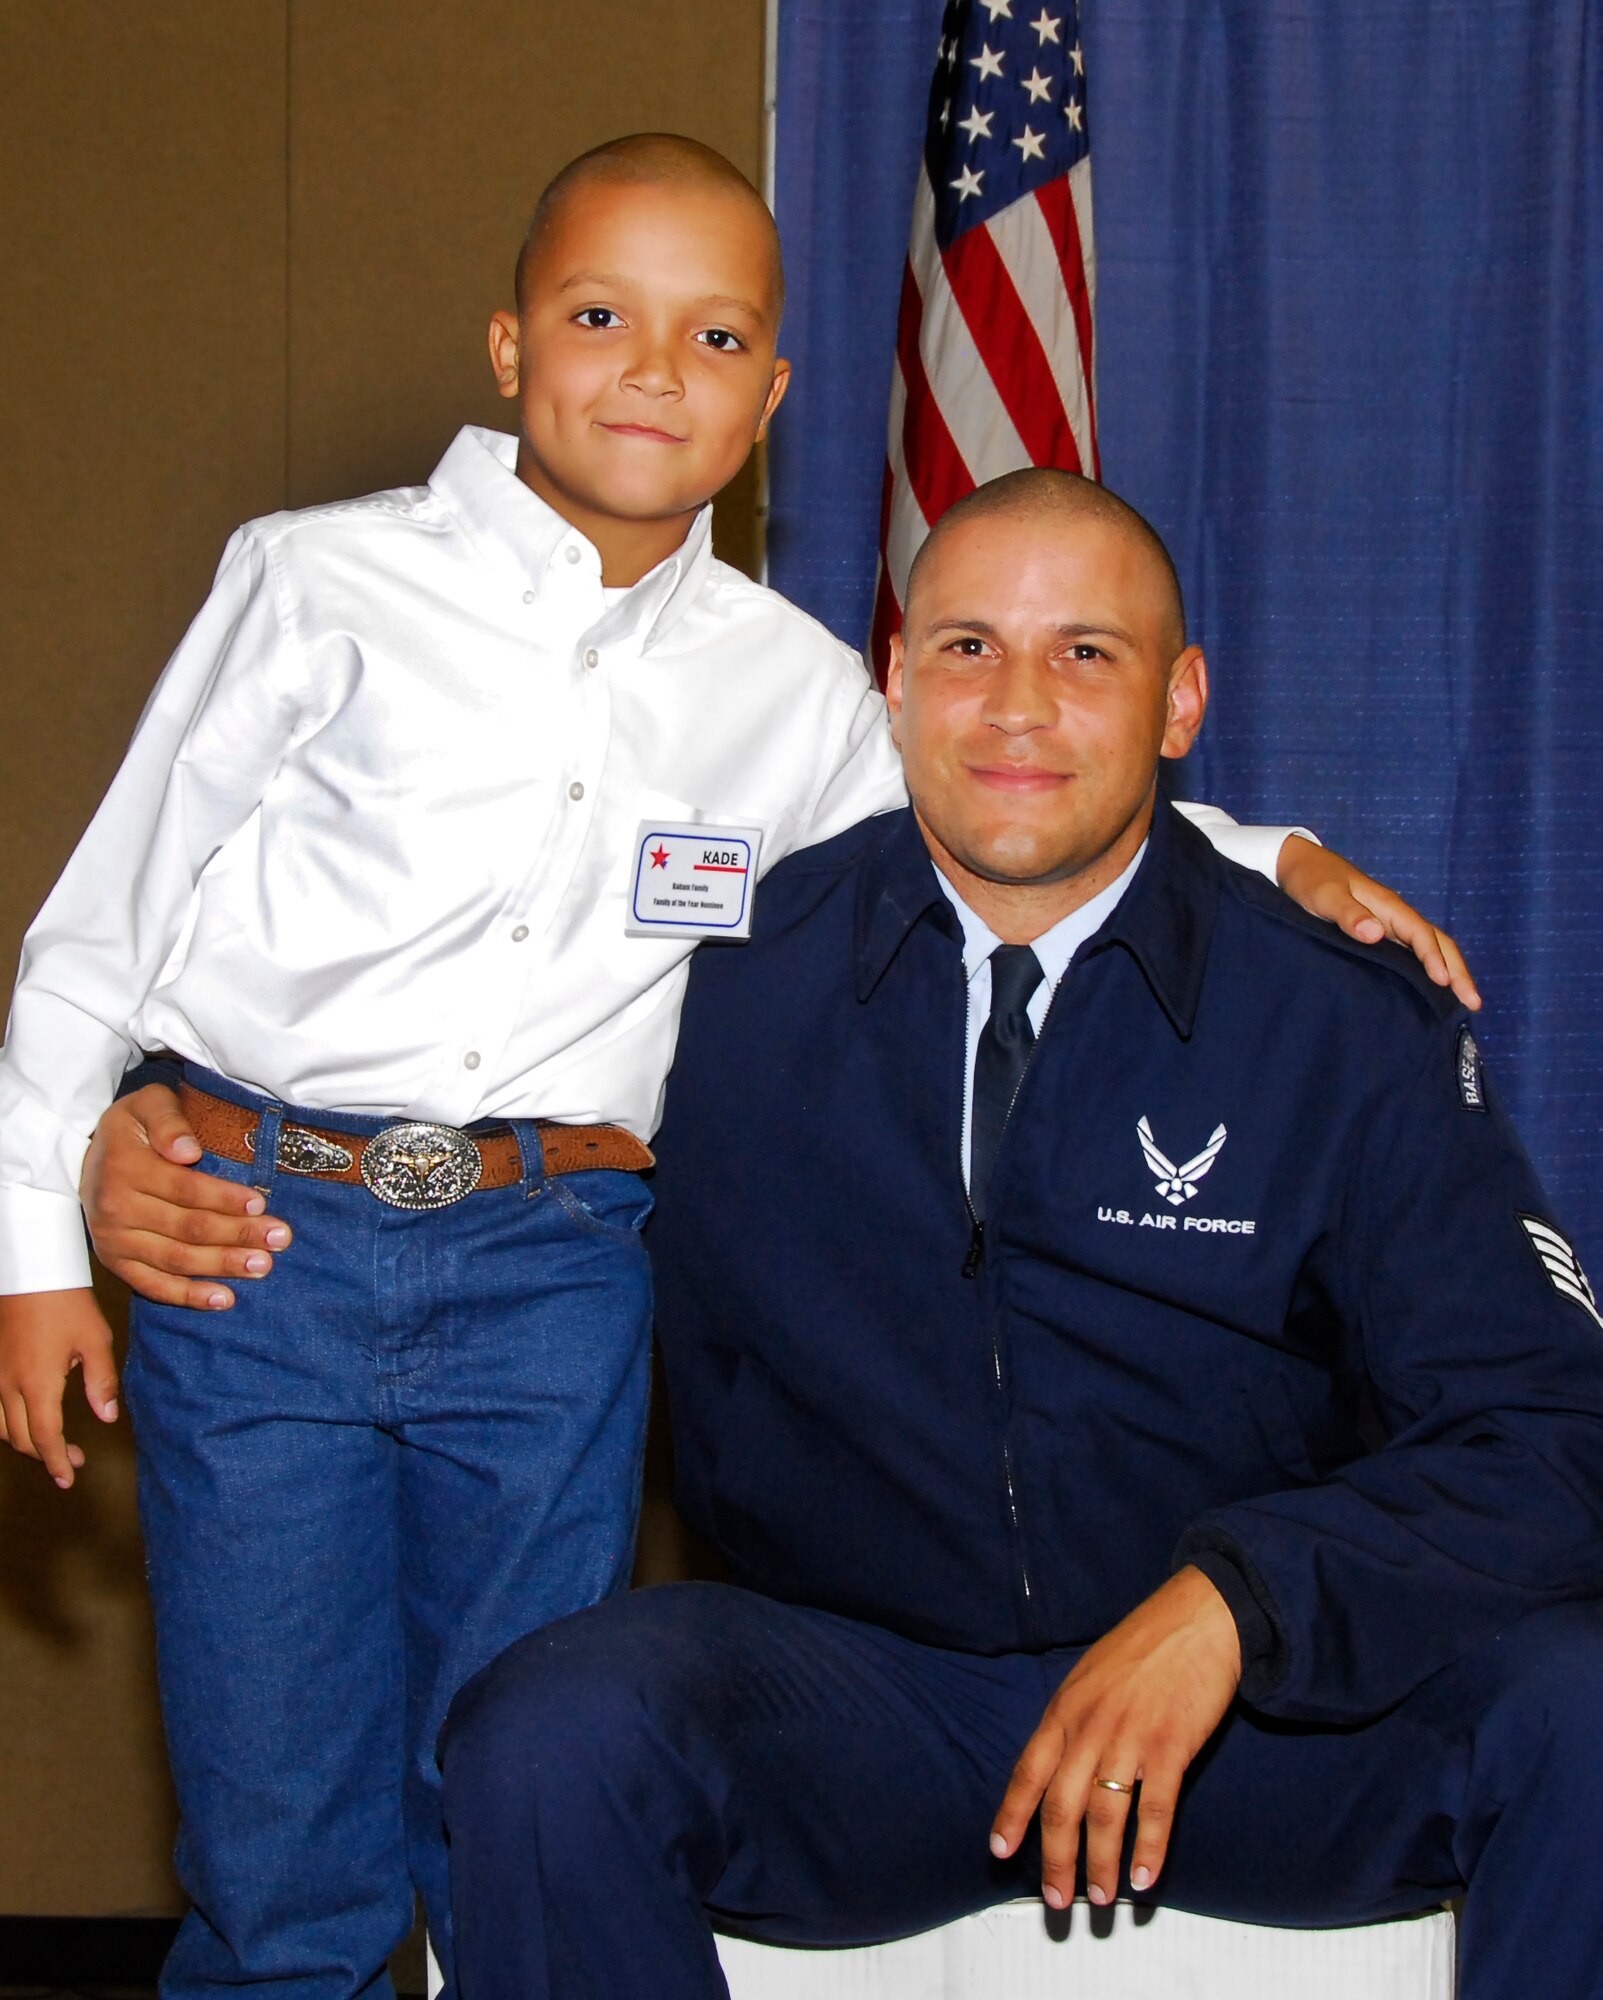 Staff Sgt. Philip Baham III, 366th Training Squadron and his son, Kade, pause for a photo after the Bahams were named Sheppard's Family of the Year for 2009. Not pictured are Tech. Sgt. Harmony Baham, 82nd Medical Group, and their 3-year-old son, Beaux. (U.S. Air Force photo/Harry Tonemah)